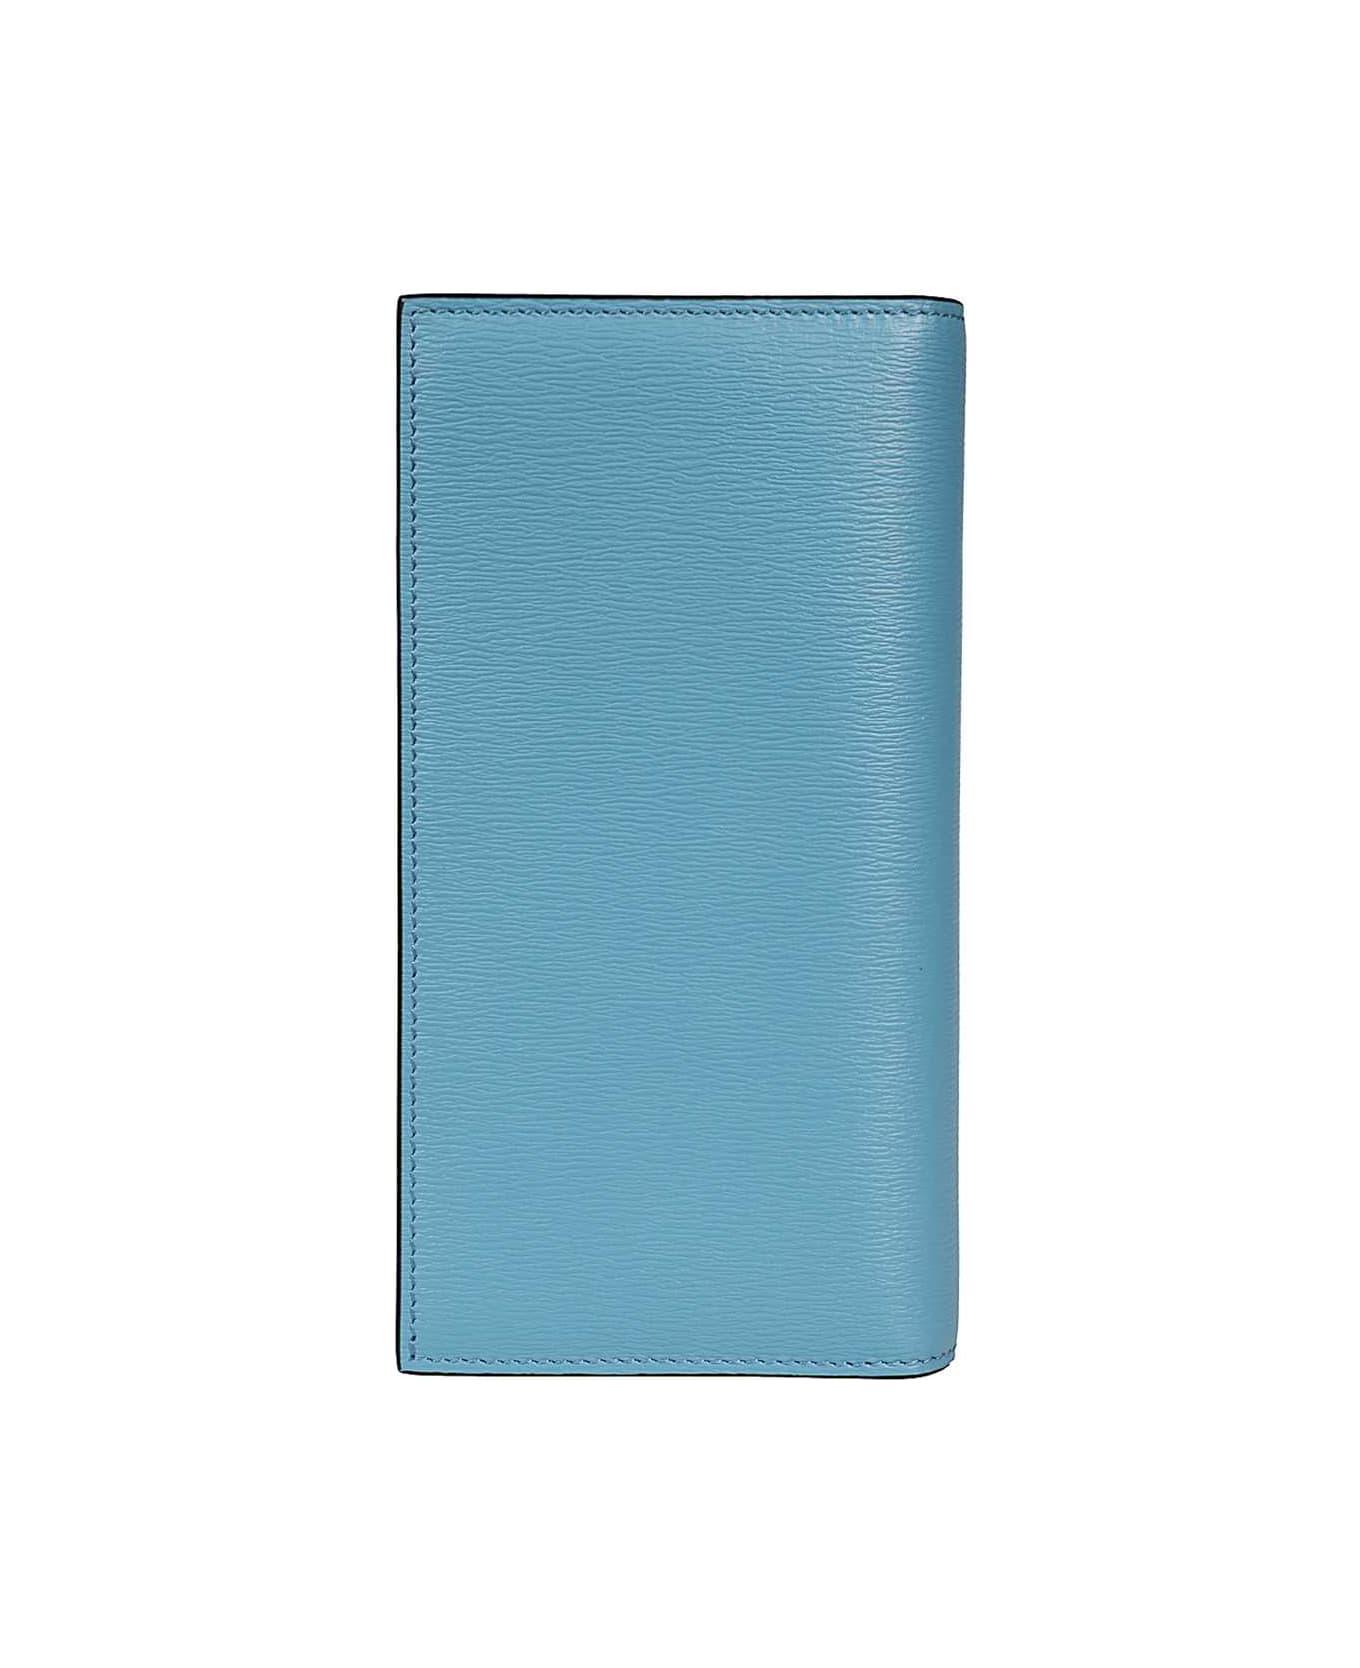 Tom Ford Leather Wallet - Light Blue 財布